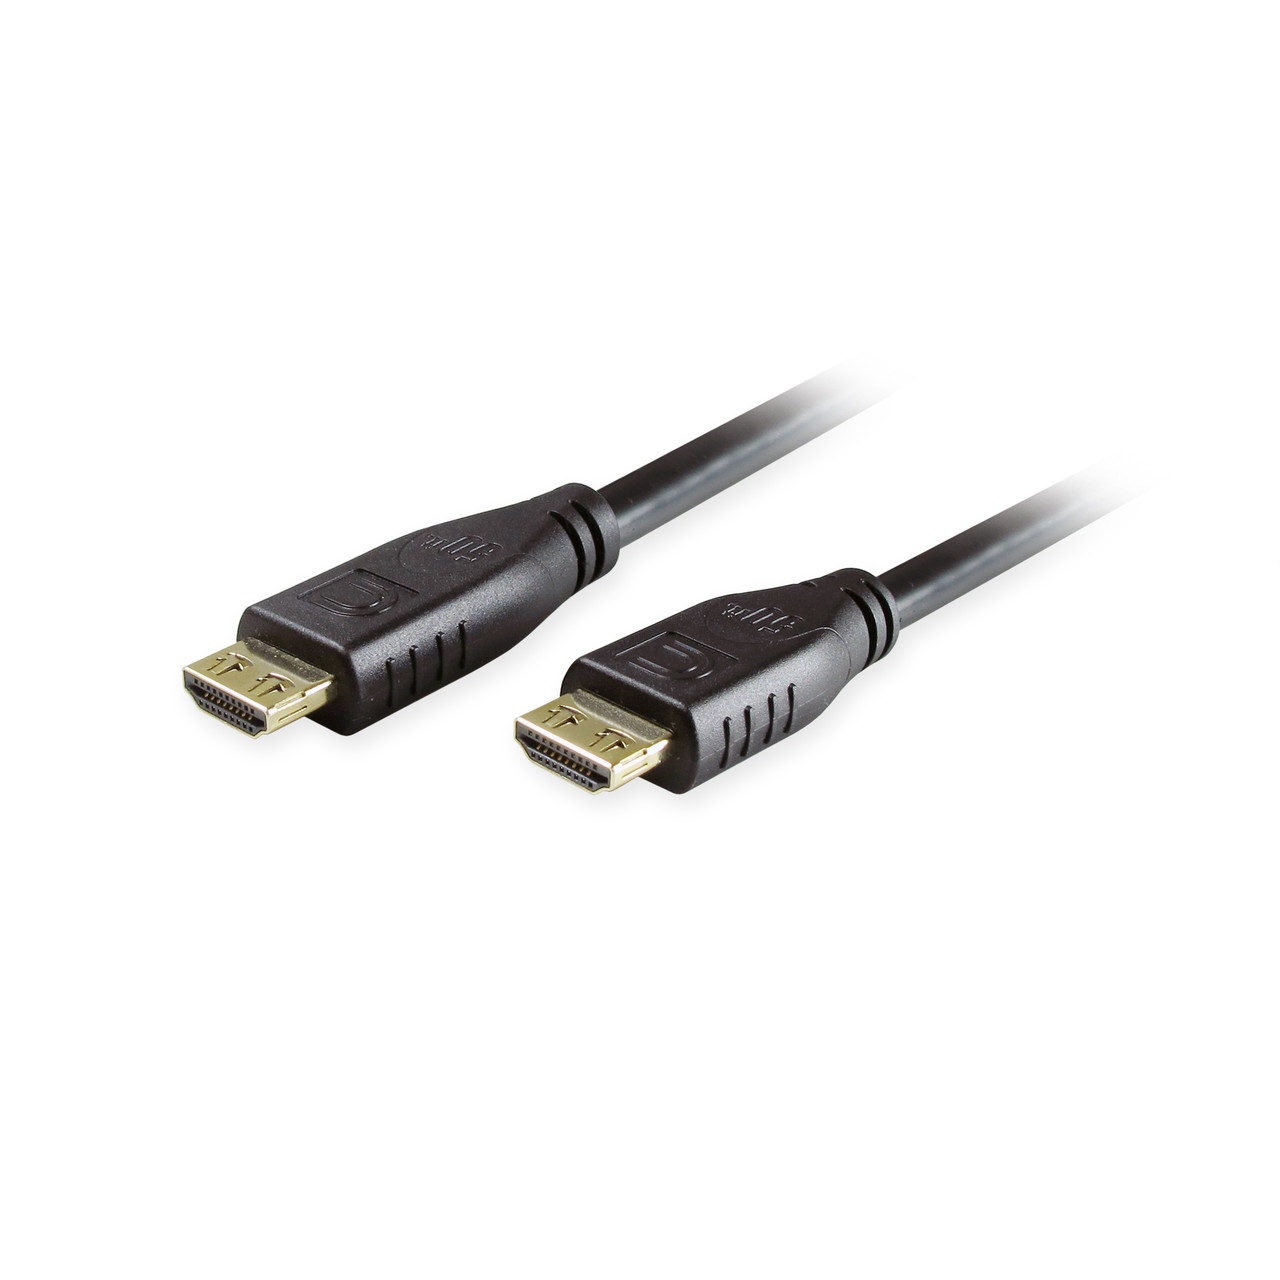 MicroFlex™ Active Pro AV/IT 10.2G Extended Length HDMI Cables with